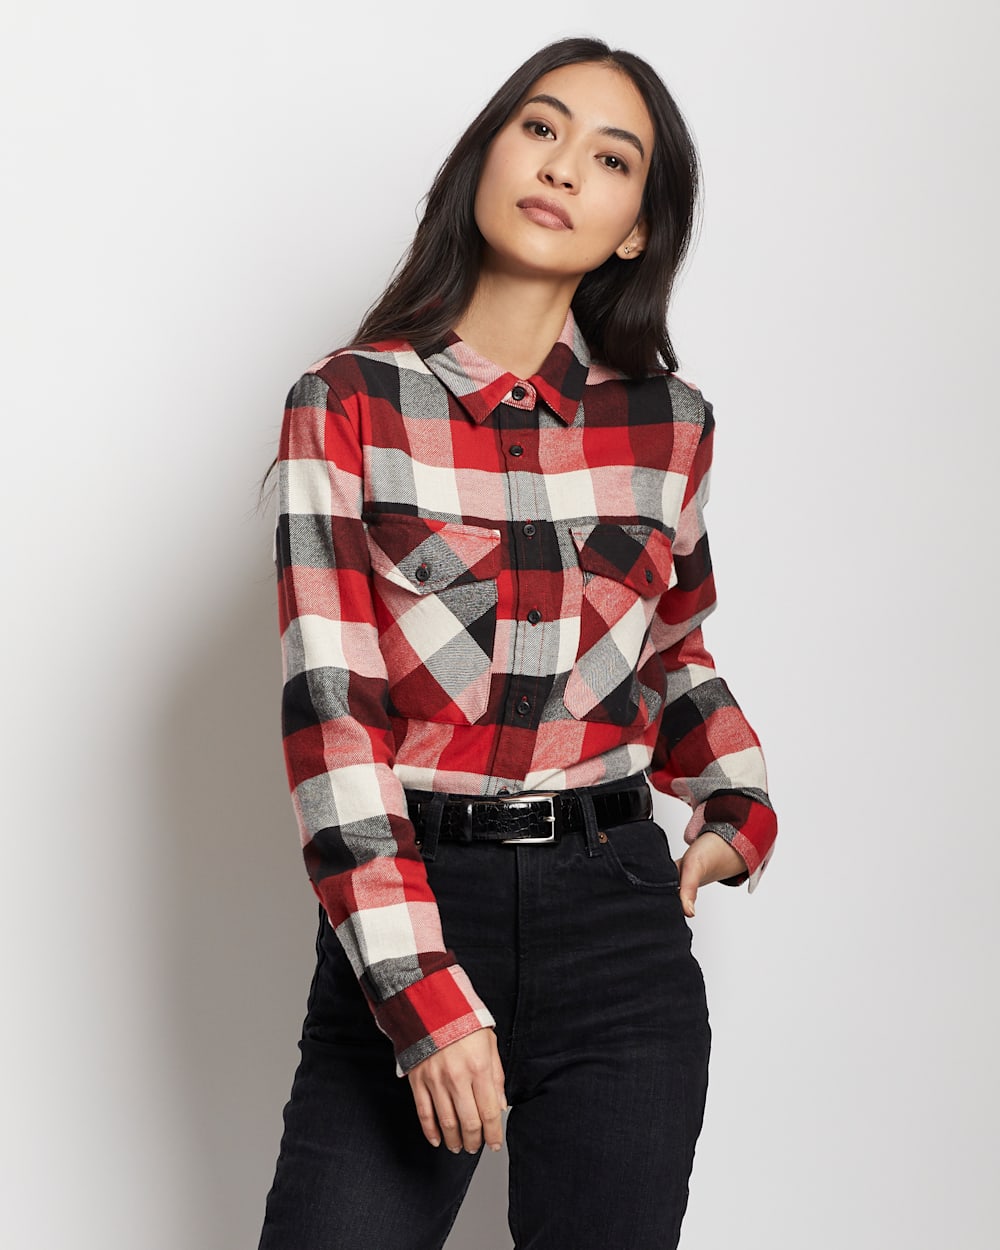 ALTERNATE VIEW OF WOMEN'S MADISON DOUBLEBRUSHED FLANNEL SHIRT IN RED/BLACK CHECK image number 5